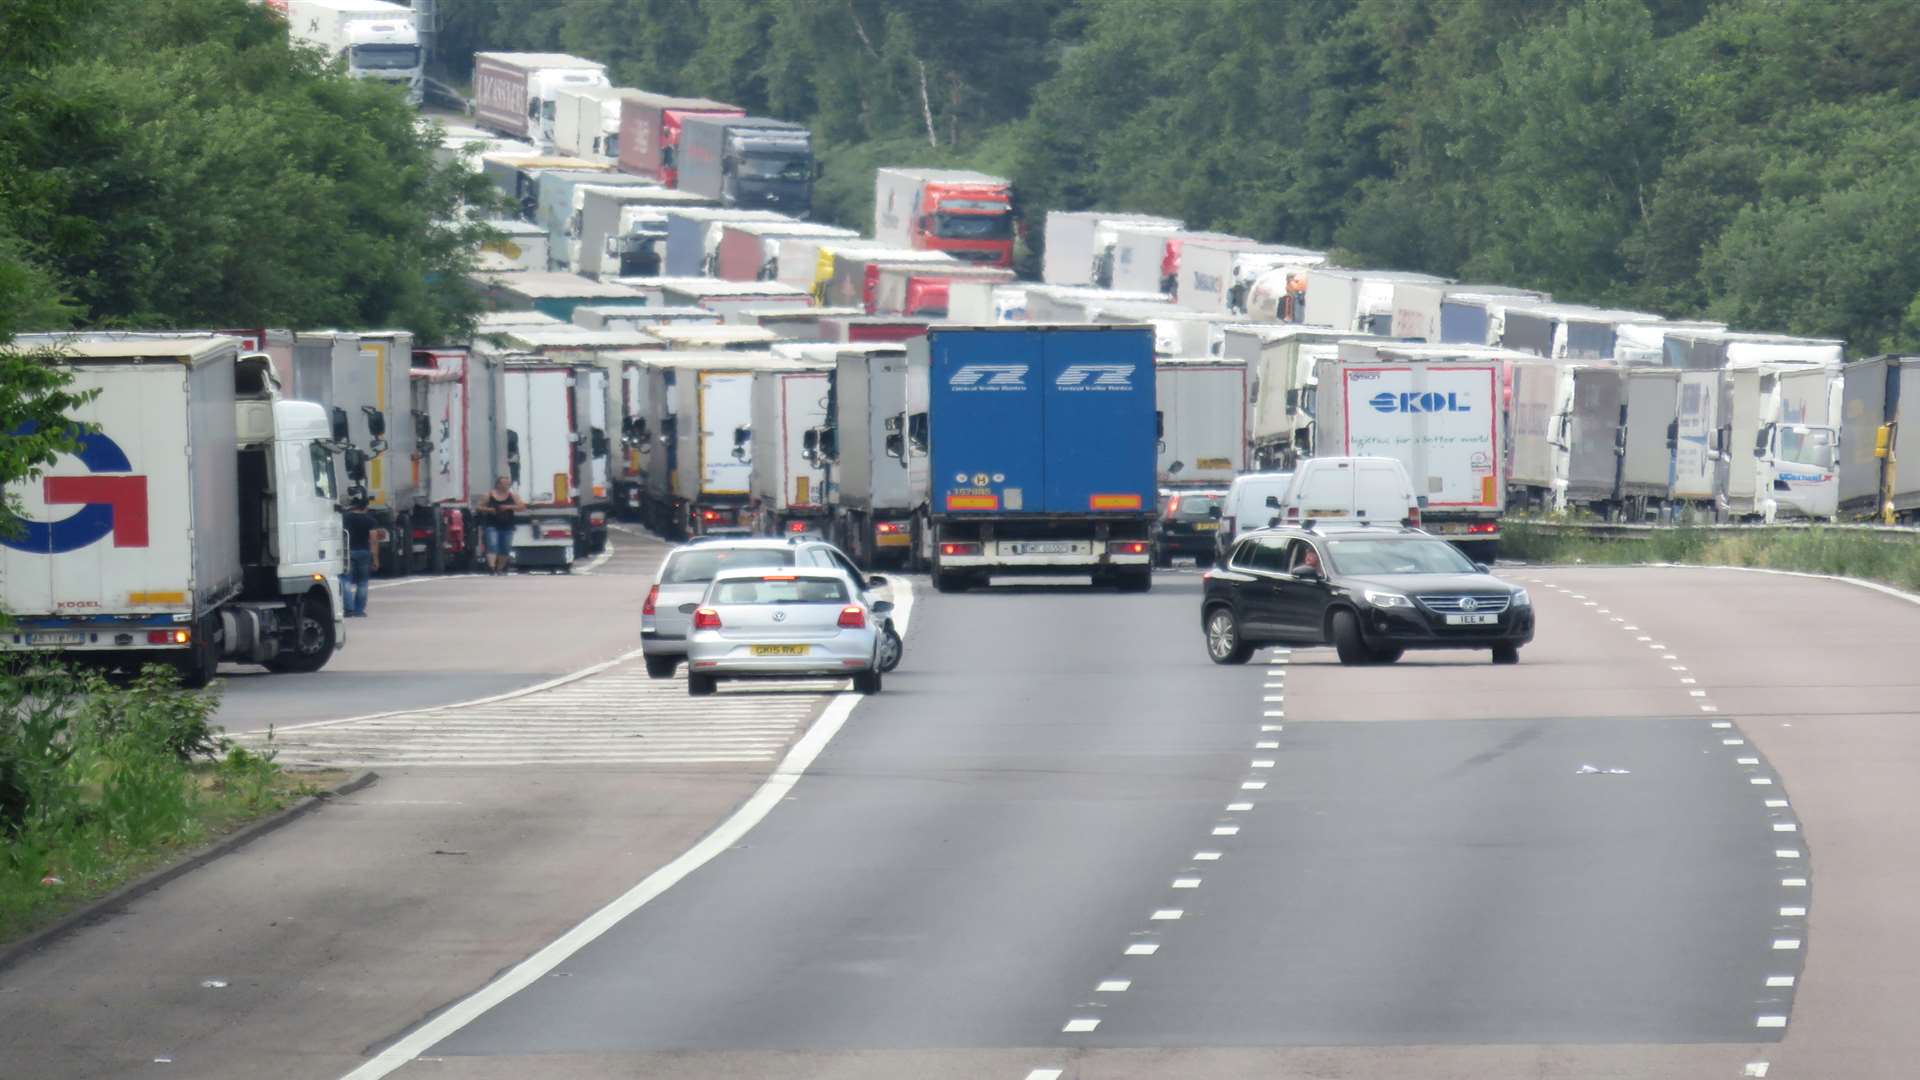 Scenes at Ashford like this were all too regular last year during the Operation Stack chaos. Picture: Andy Clark